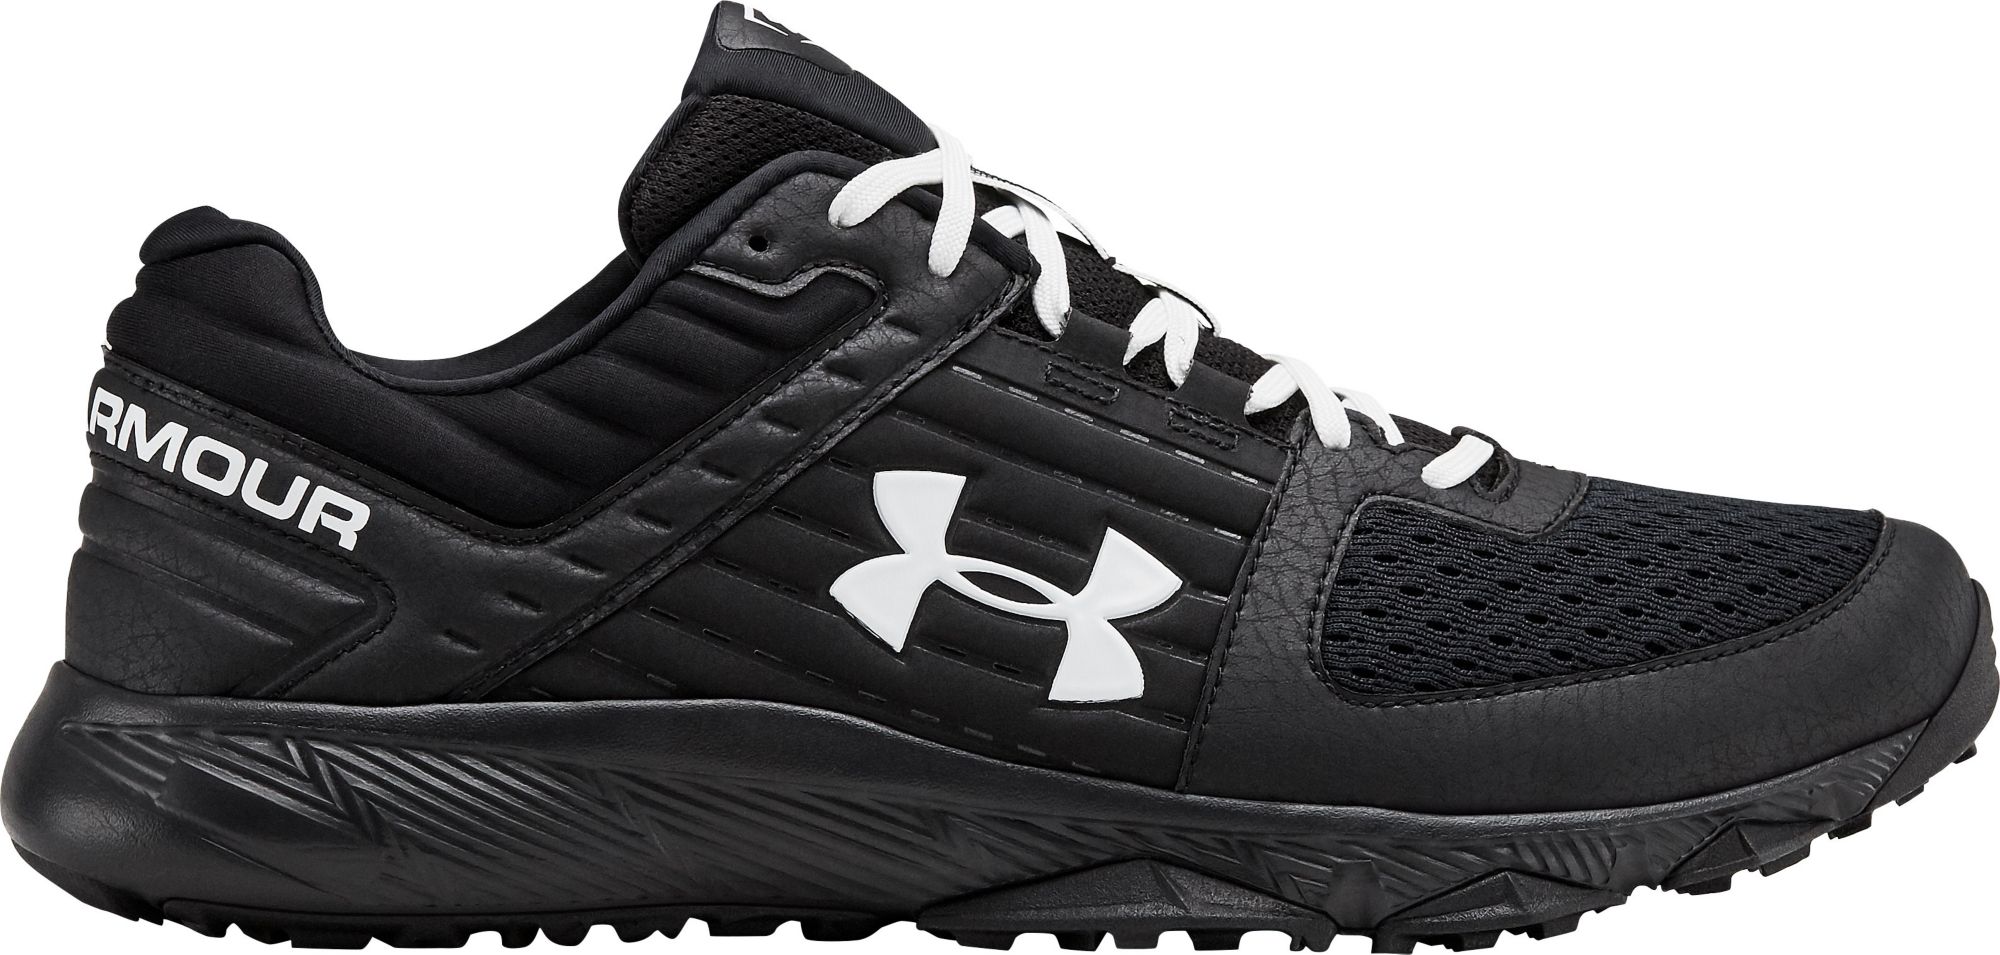 under armour shoes baseball